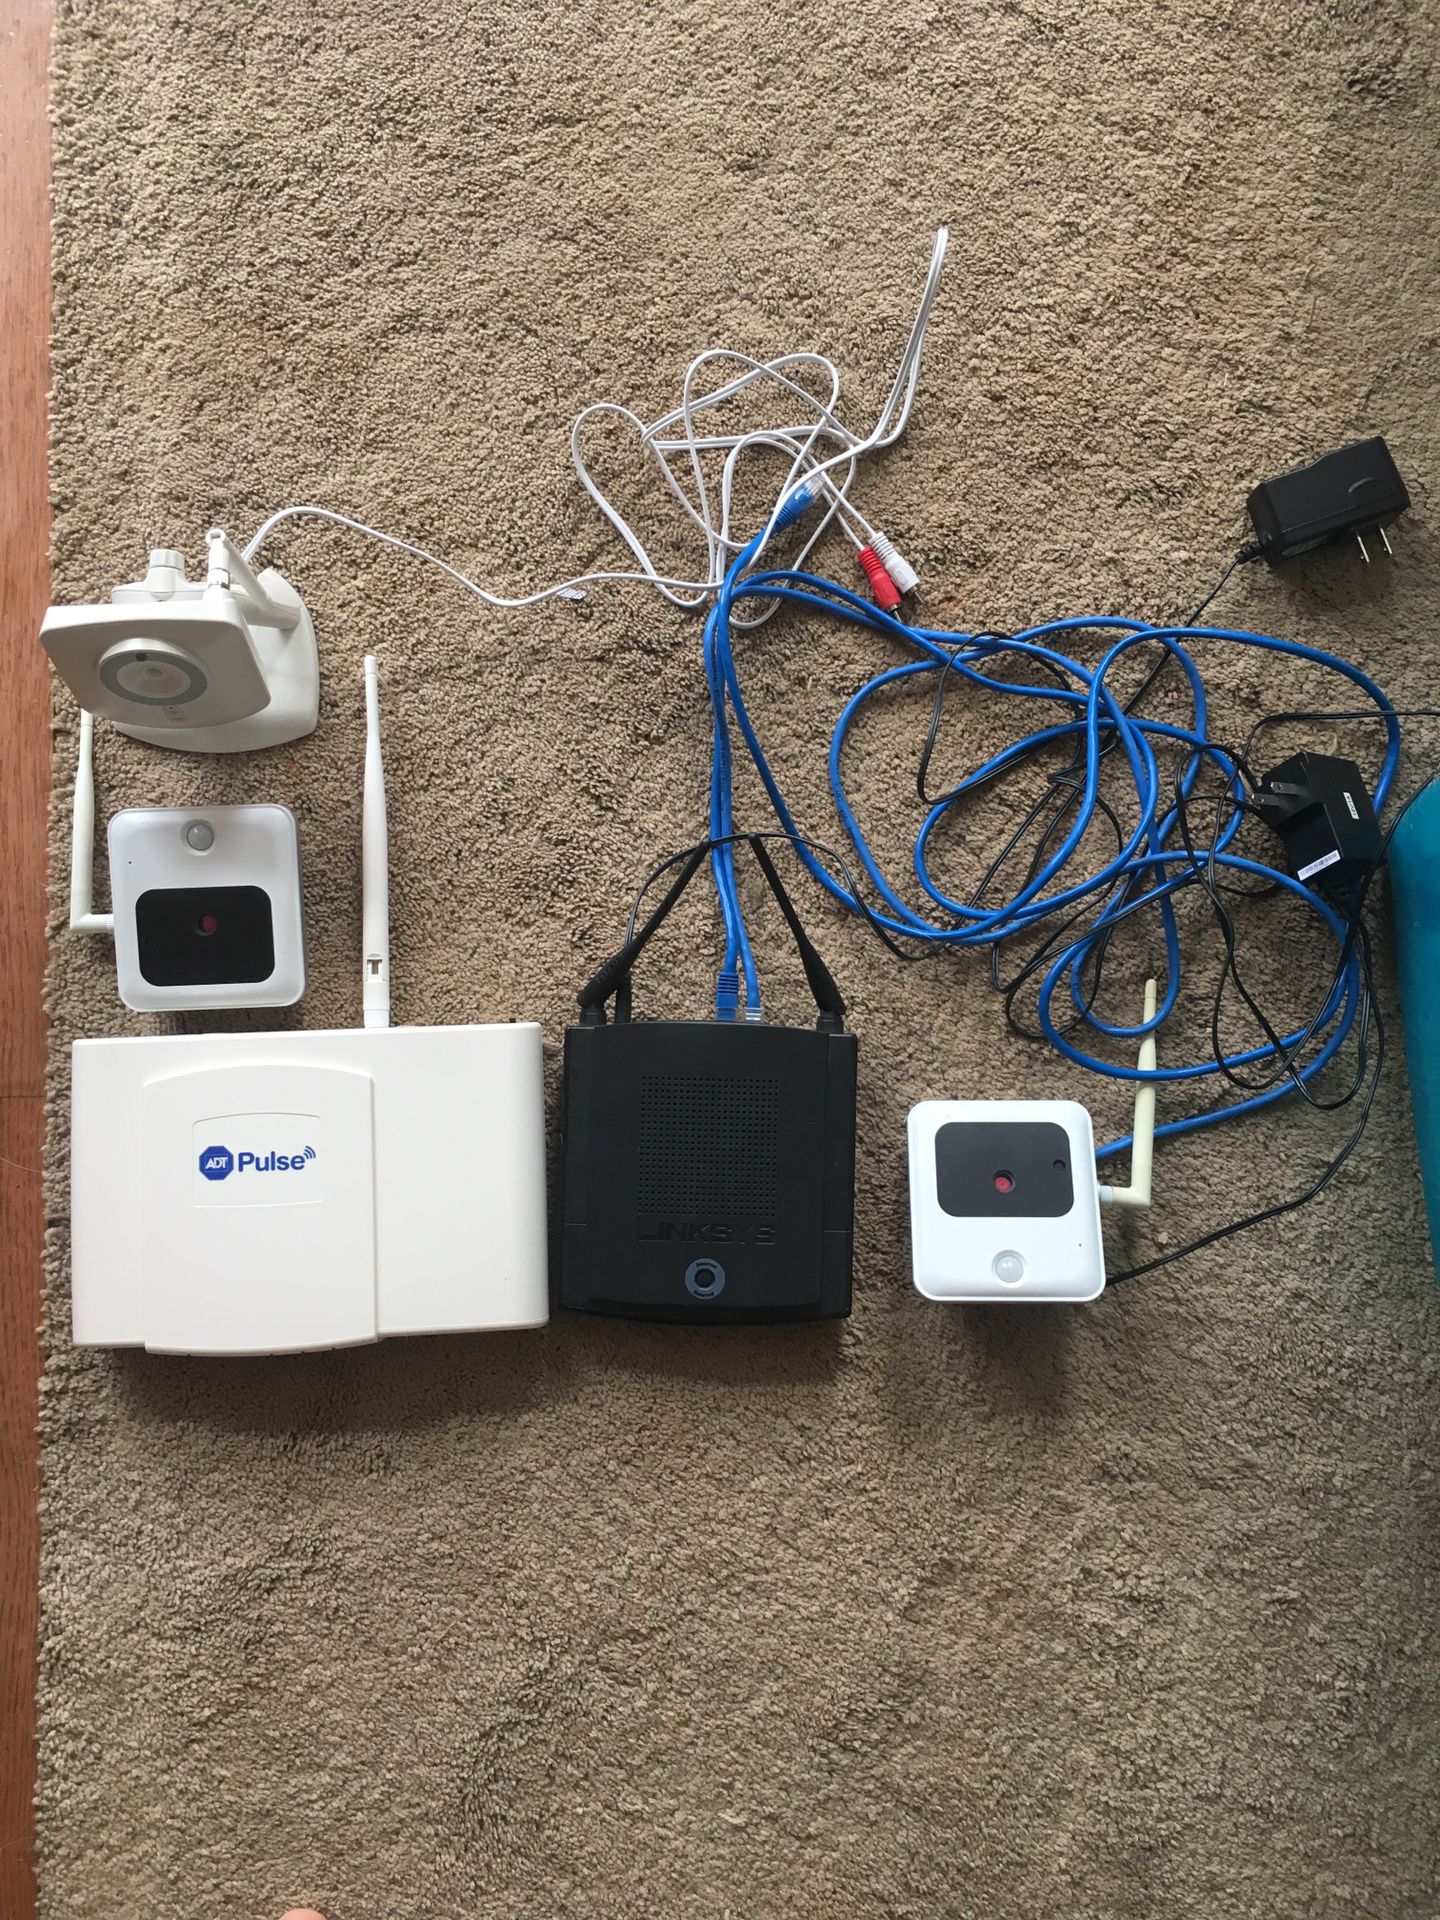 ADT PulsePoint security system with linksys router